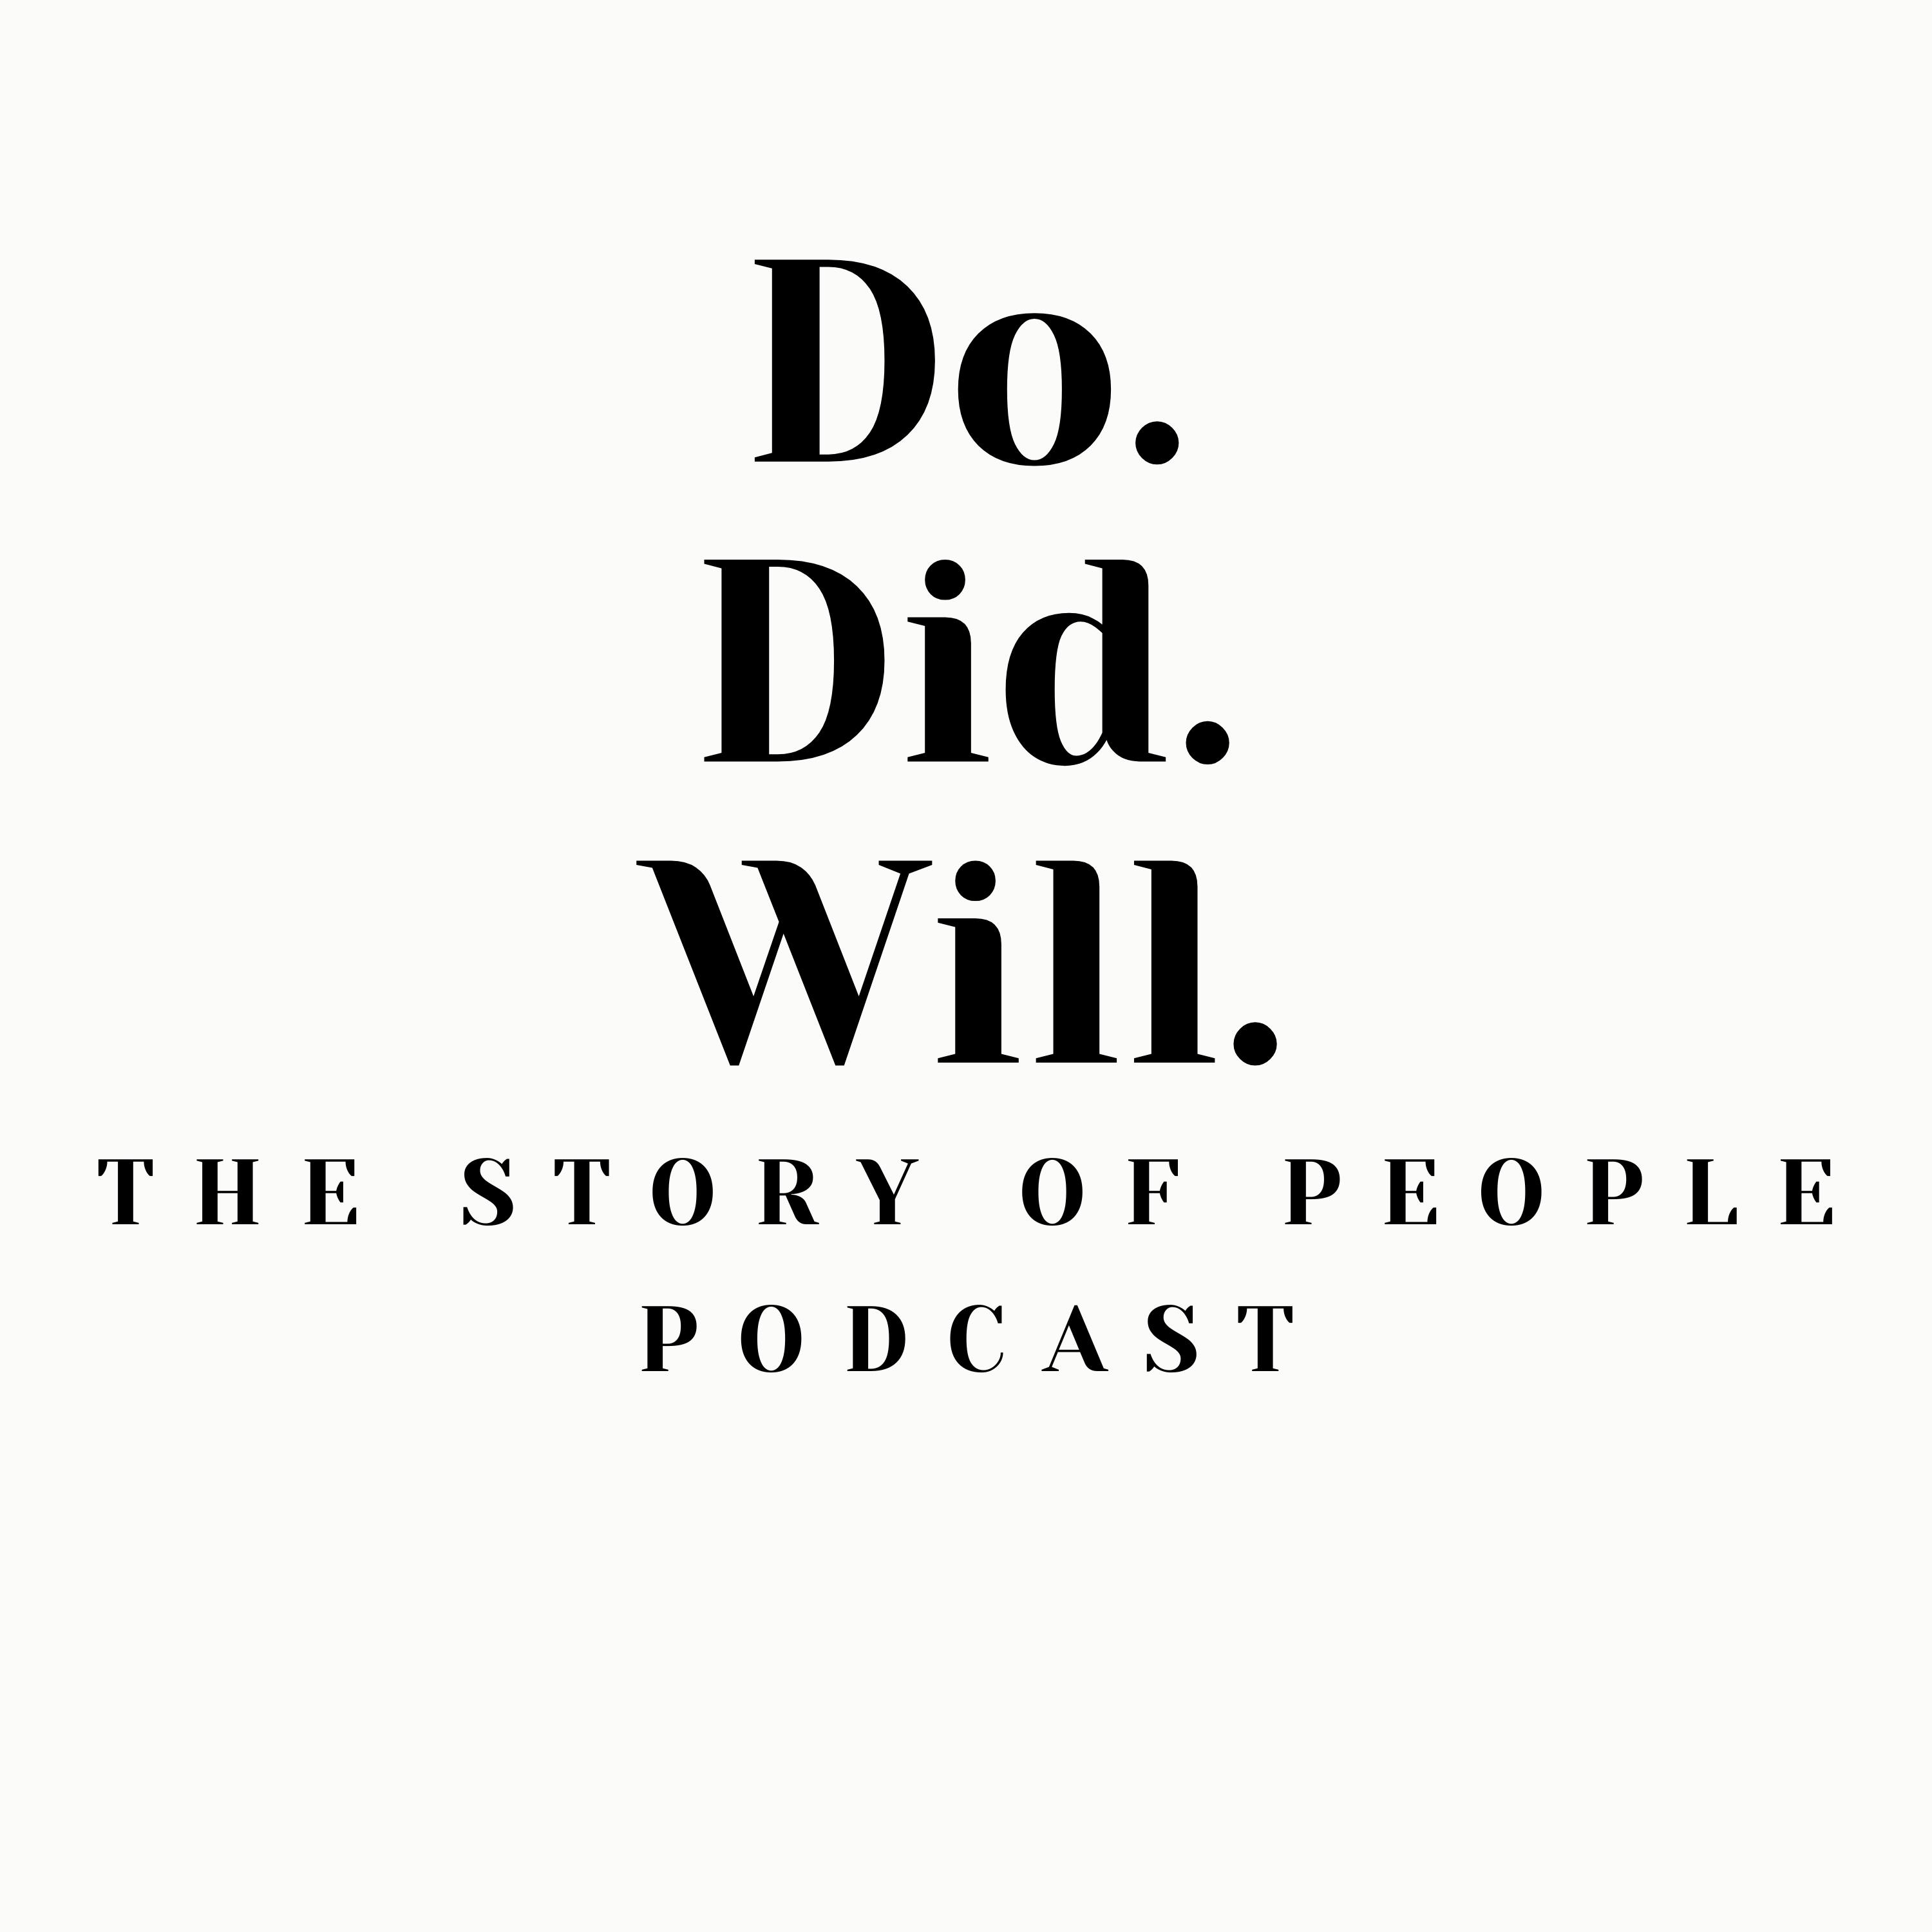 Do.Did.Will. "The Story of People Podcast"